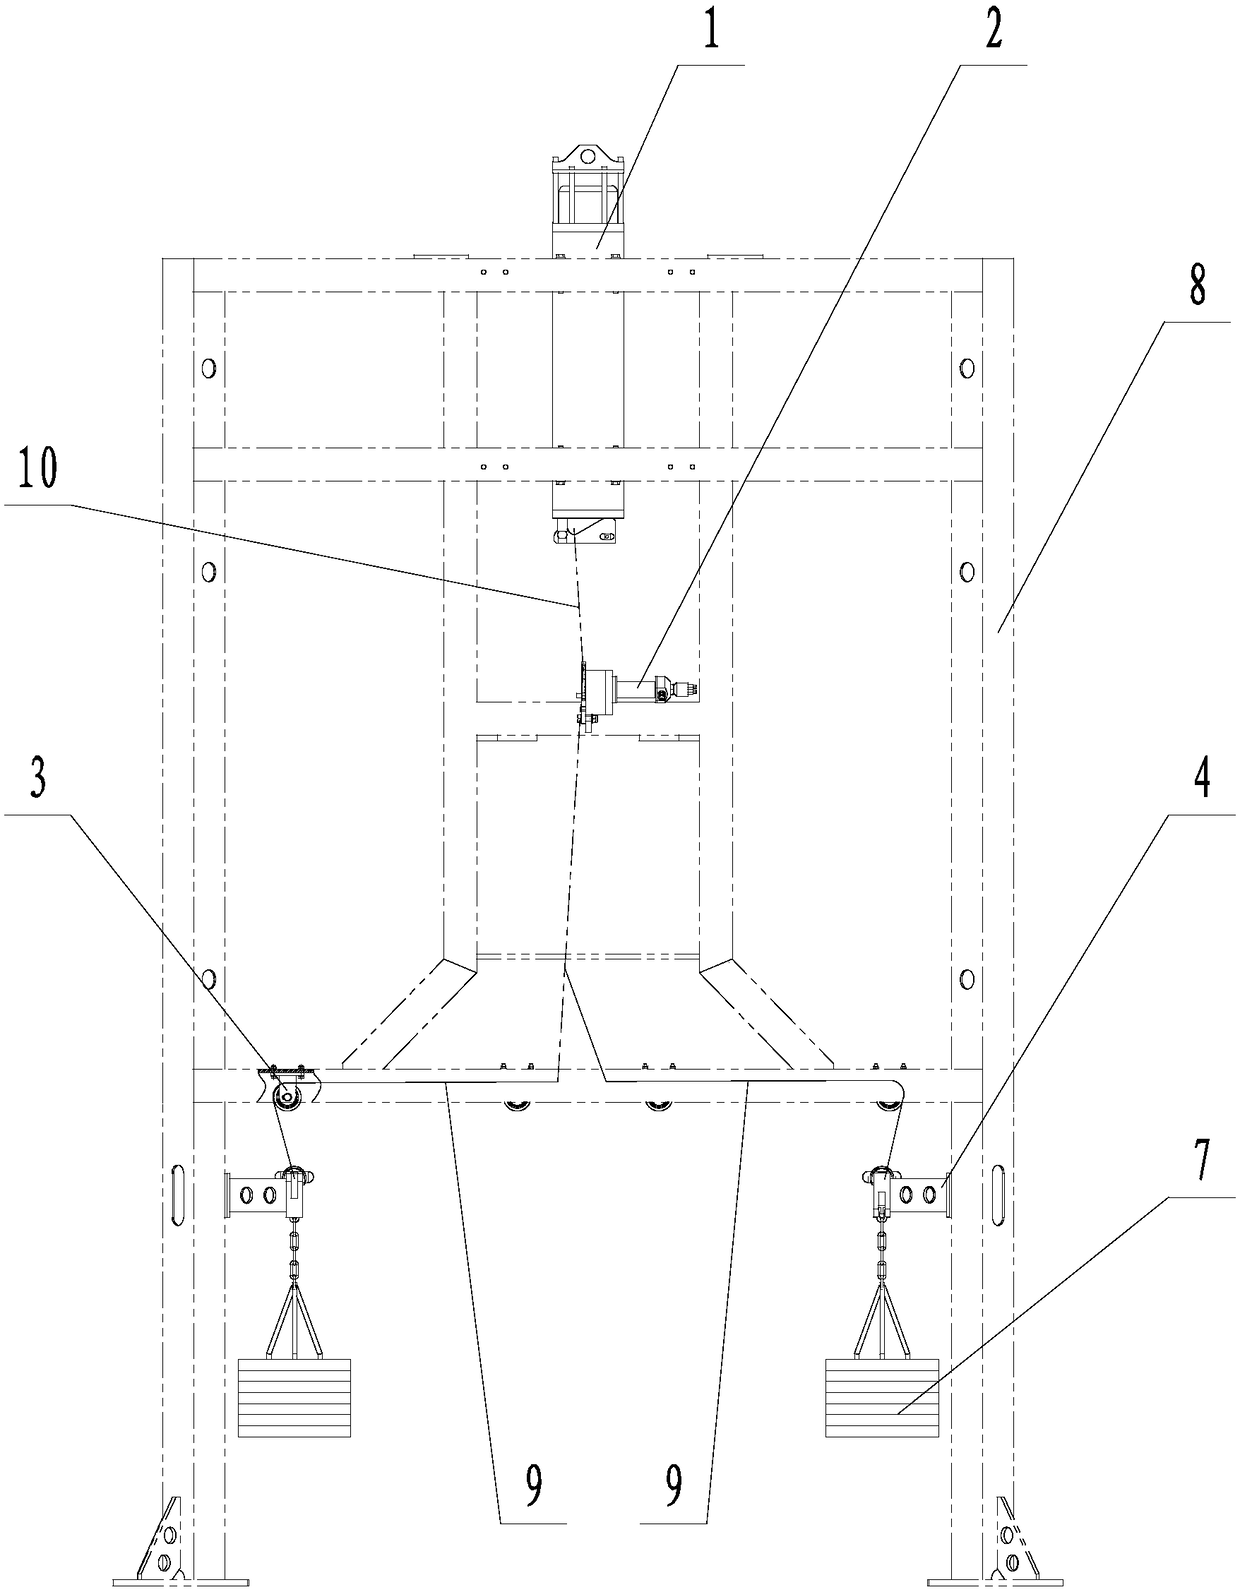 Deep-sea structure release and load rejection system